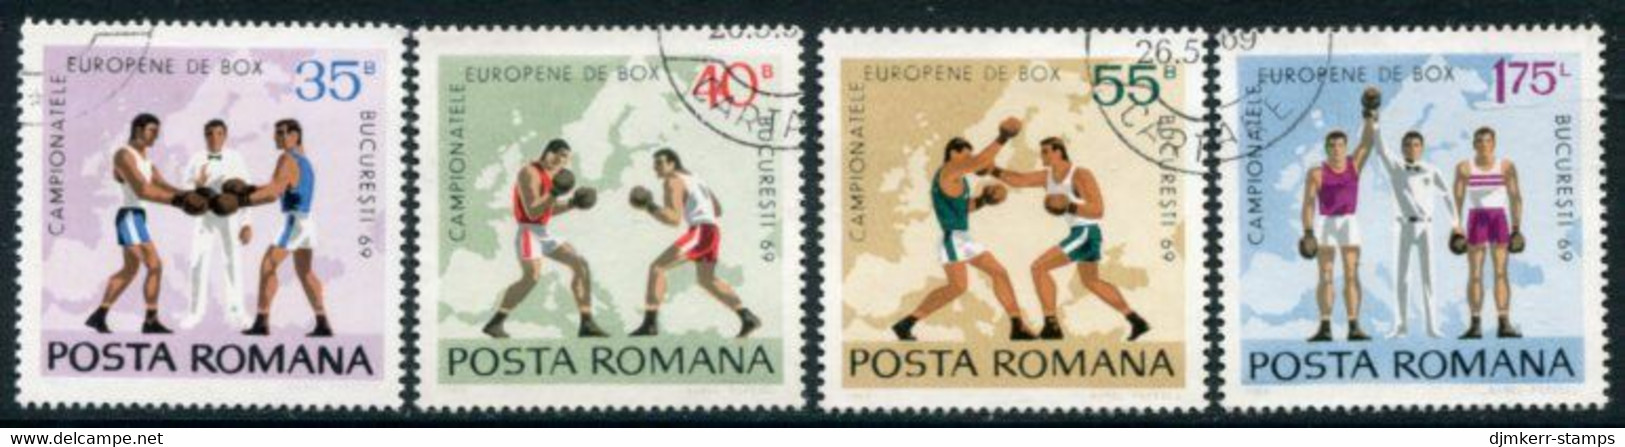 ROMANIA 1969 European Boxing Championship Used  Michel 2767-70 - Used Stamps